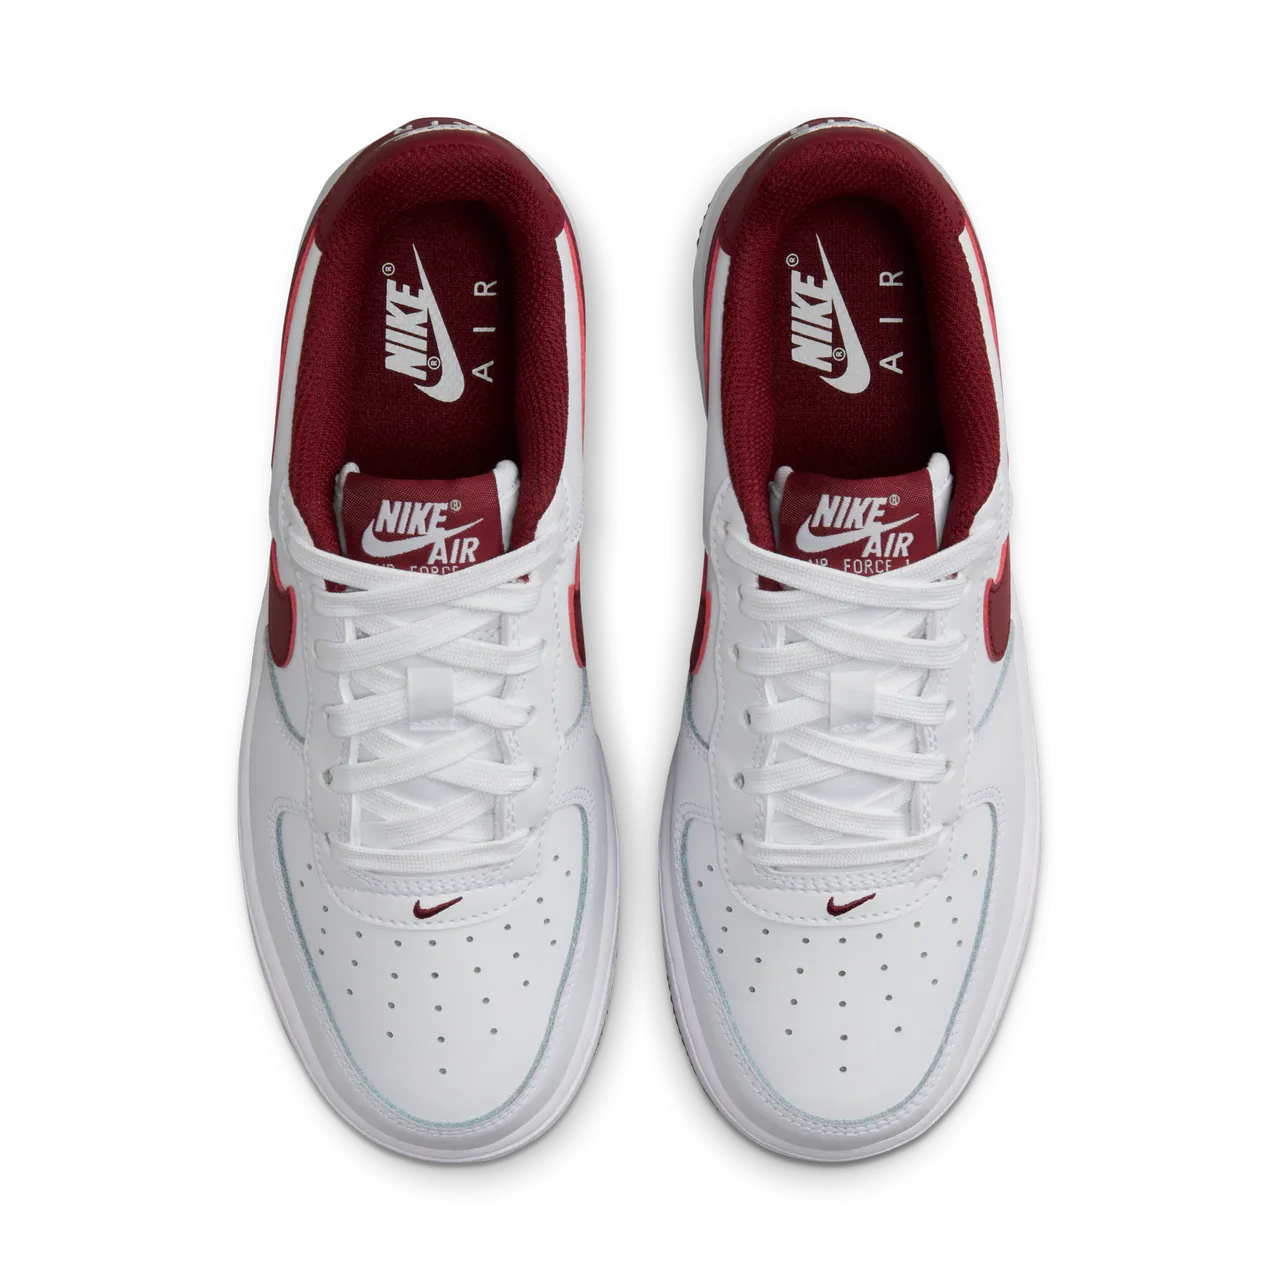 Nike Air Force 1 Older Kids' Shoes - White